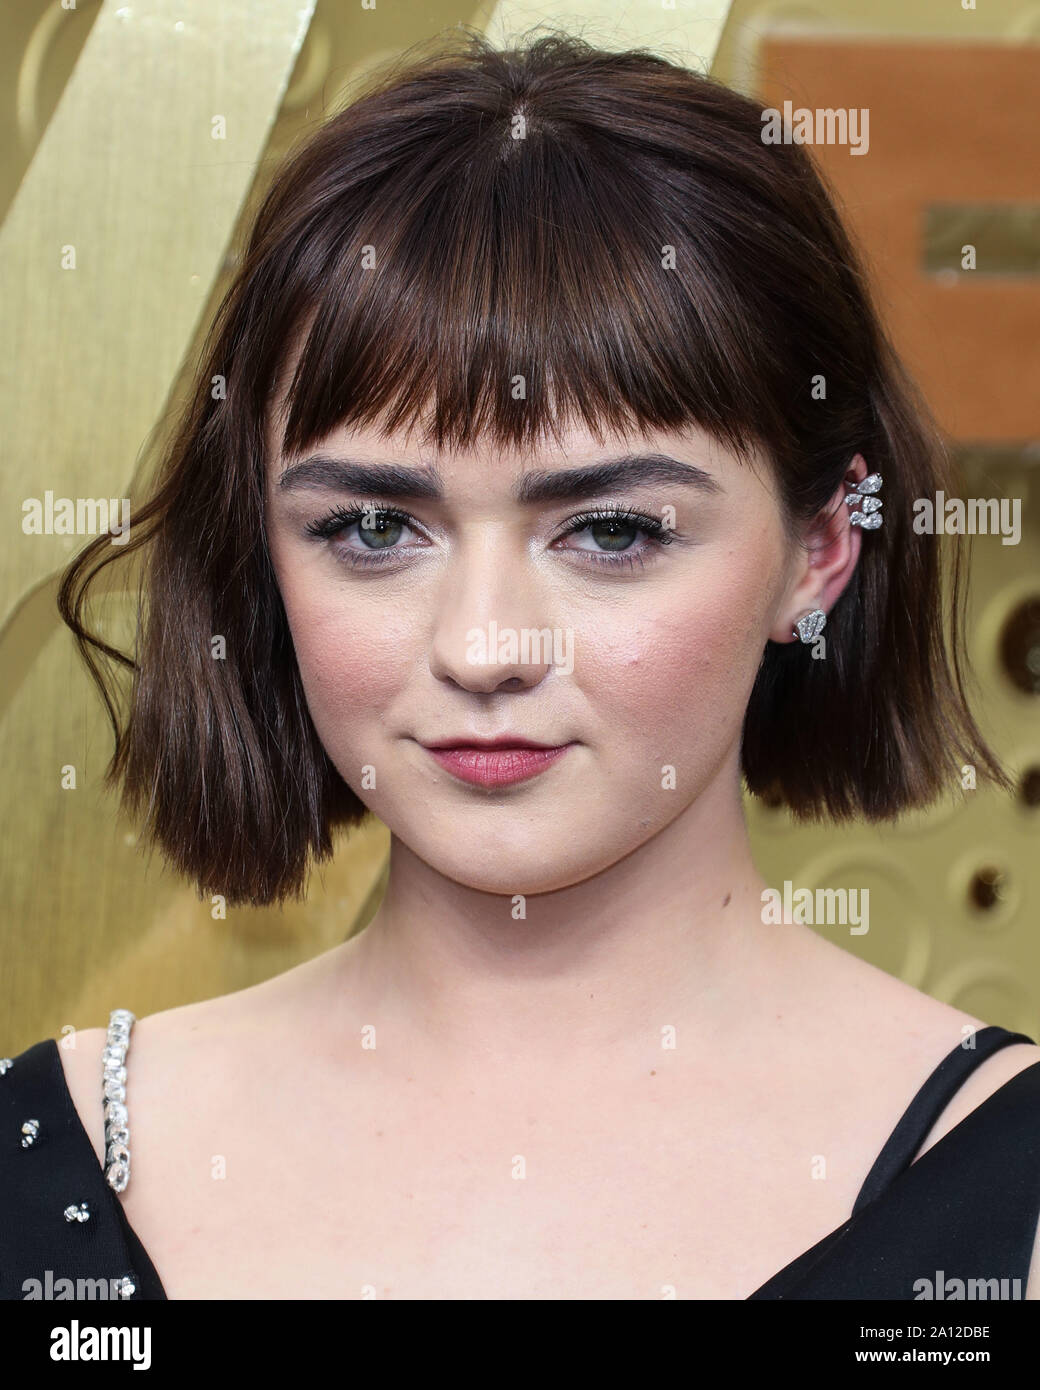 LOS ANGELES, CALIFORNIA, USA - SEPTEMBER 22: Maisie Williams arrives at the 71st Annual Primetime Emmy Awards held at Microsoft Theater L.A. Live on September 22, 2019 in Los Angeles, California, United States. (Photo by Xavier Collin/Image Press Agency) Stock Photo